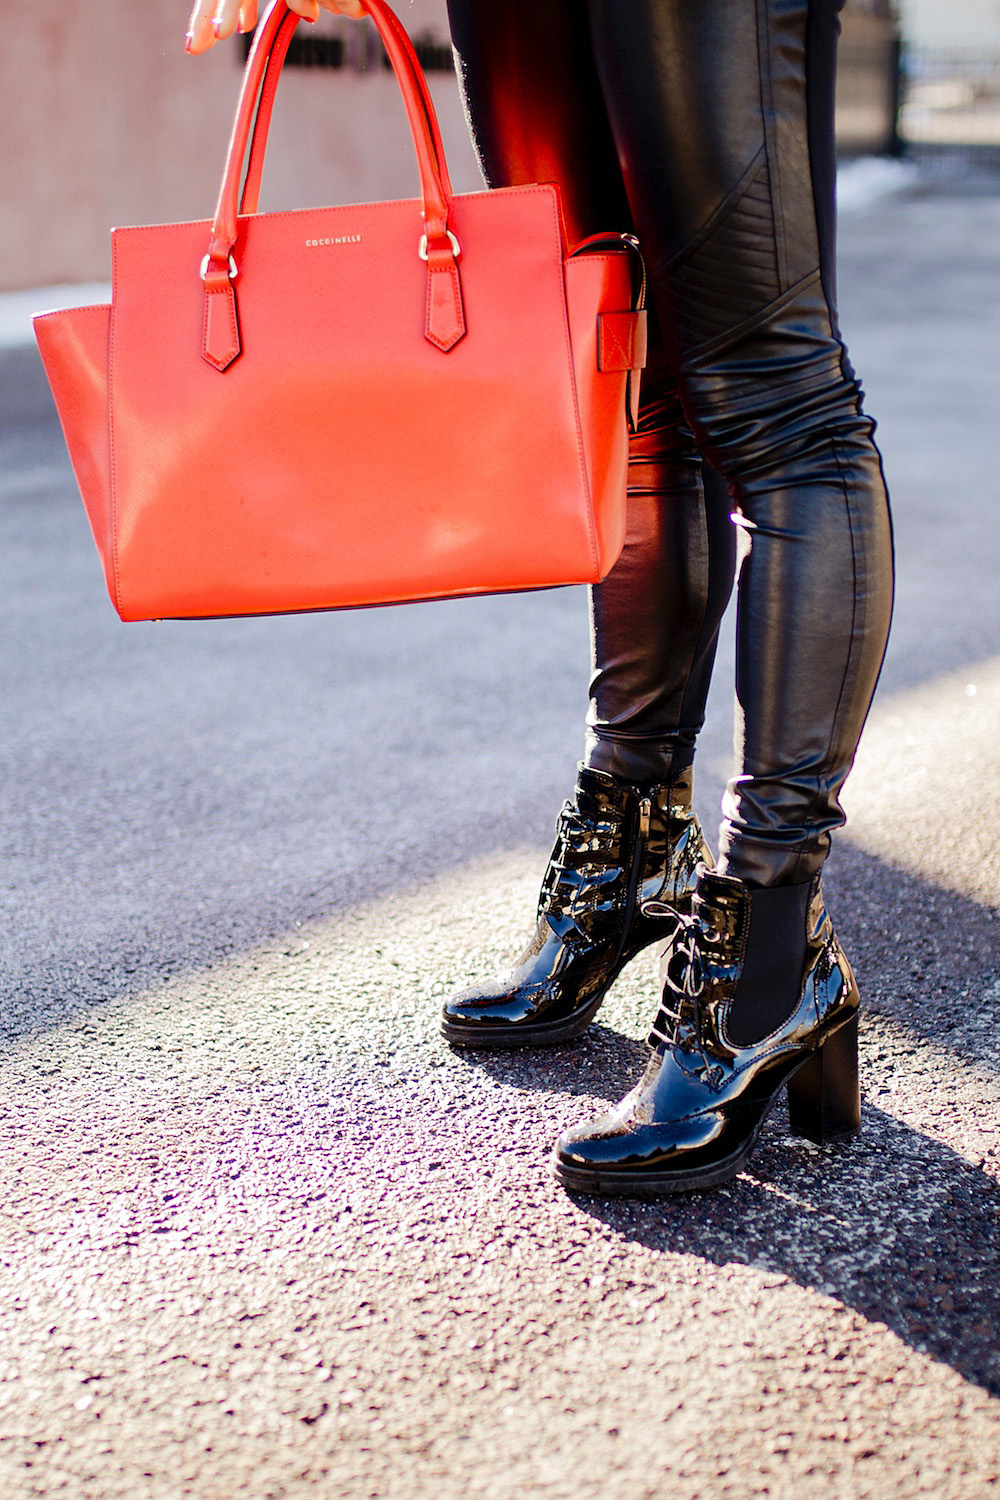 winter outfit inspiration _ winter cape _ orange leather bag coccinelle